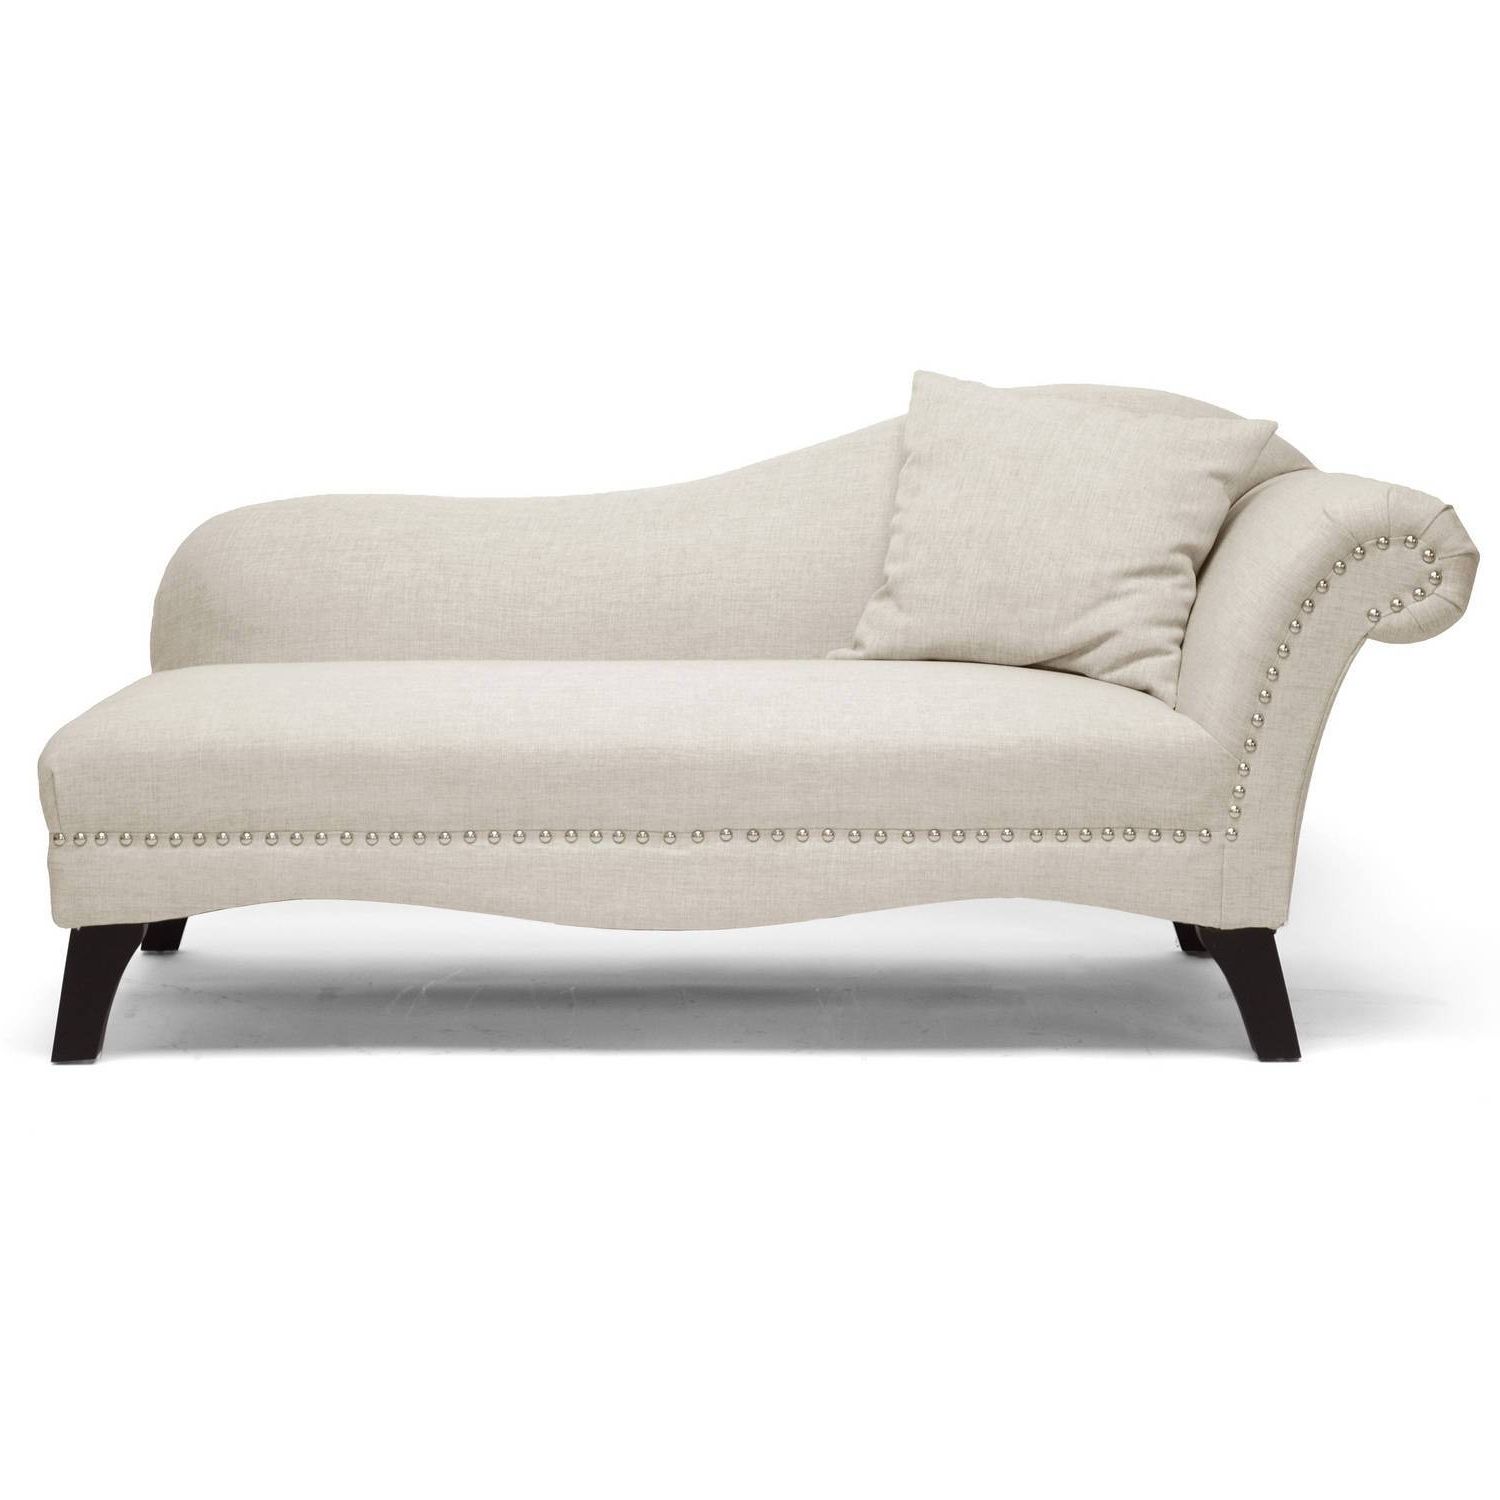 Well Known Incredible Chaise Lounge Sofa Aifaresidencycom Pic For Inspiration For Ashley Chaise Lounges (View 11 of 15)